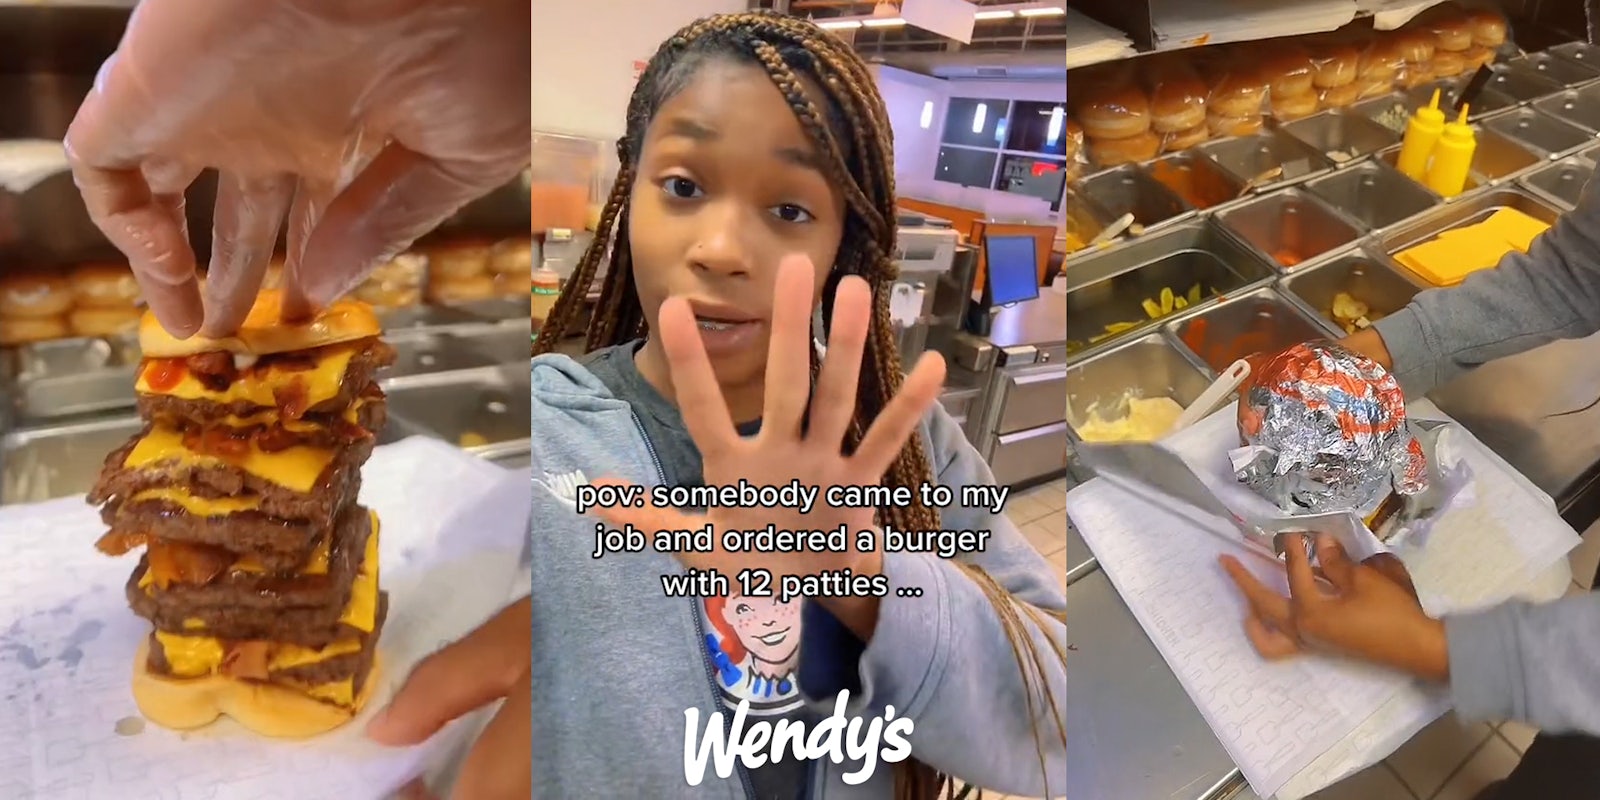 Wendy's employees holding giant burger together (l) Wendy's employee with caption 'pov: somebody came to my job and ordered a burger with 12 patties...' with Wendy's logo at bottom (c) Wendy's employee wrapping giant burger (r)